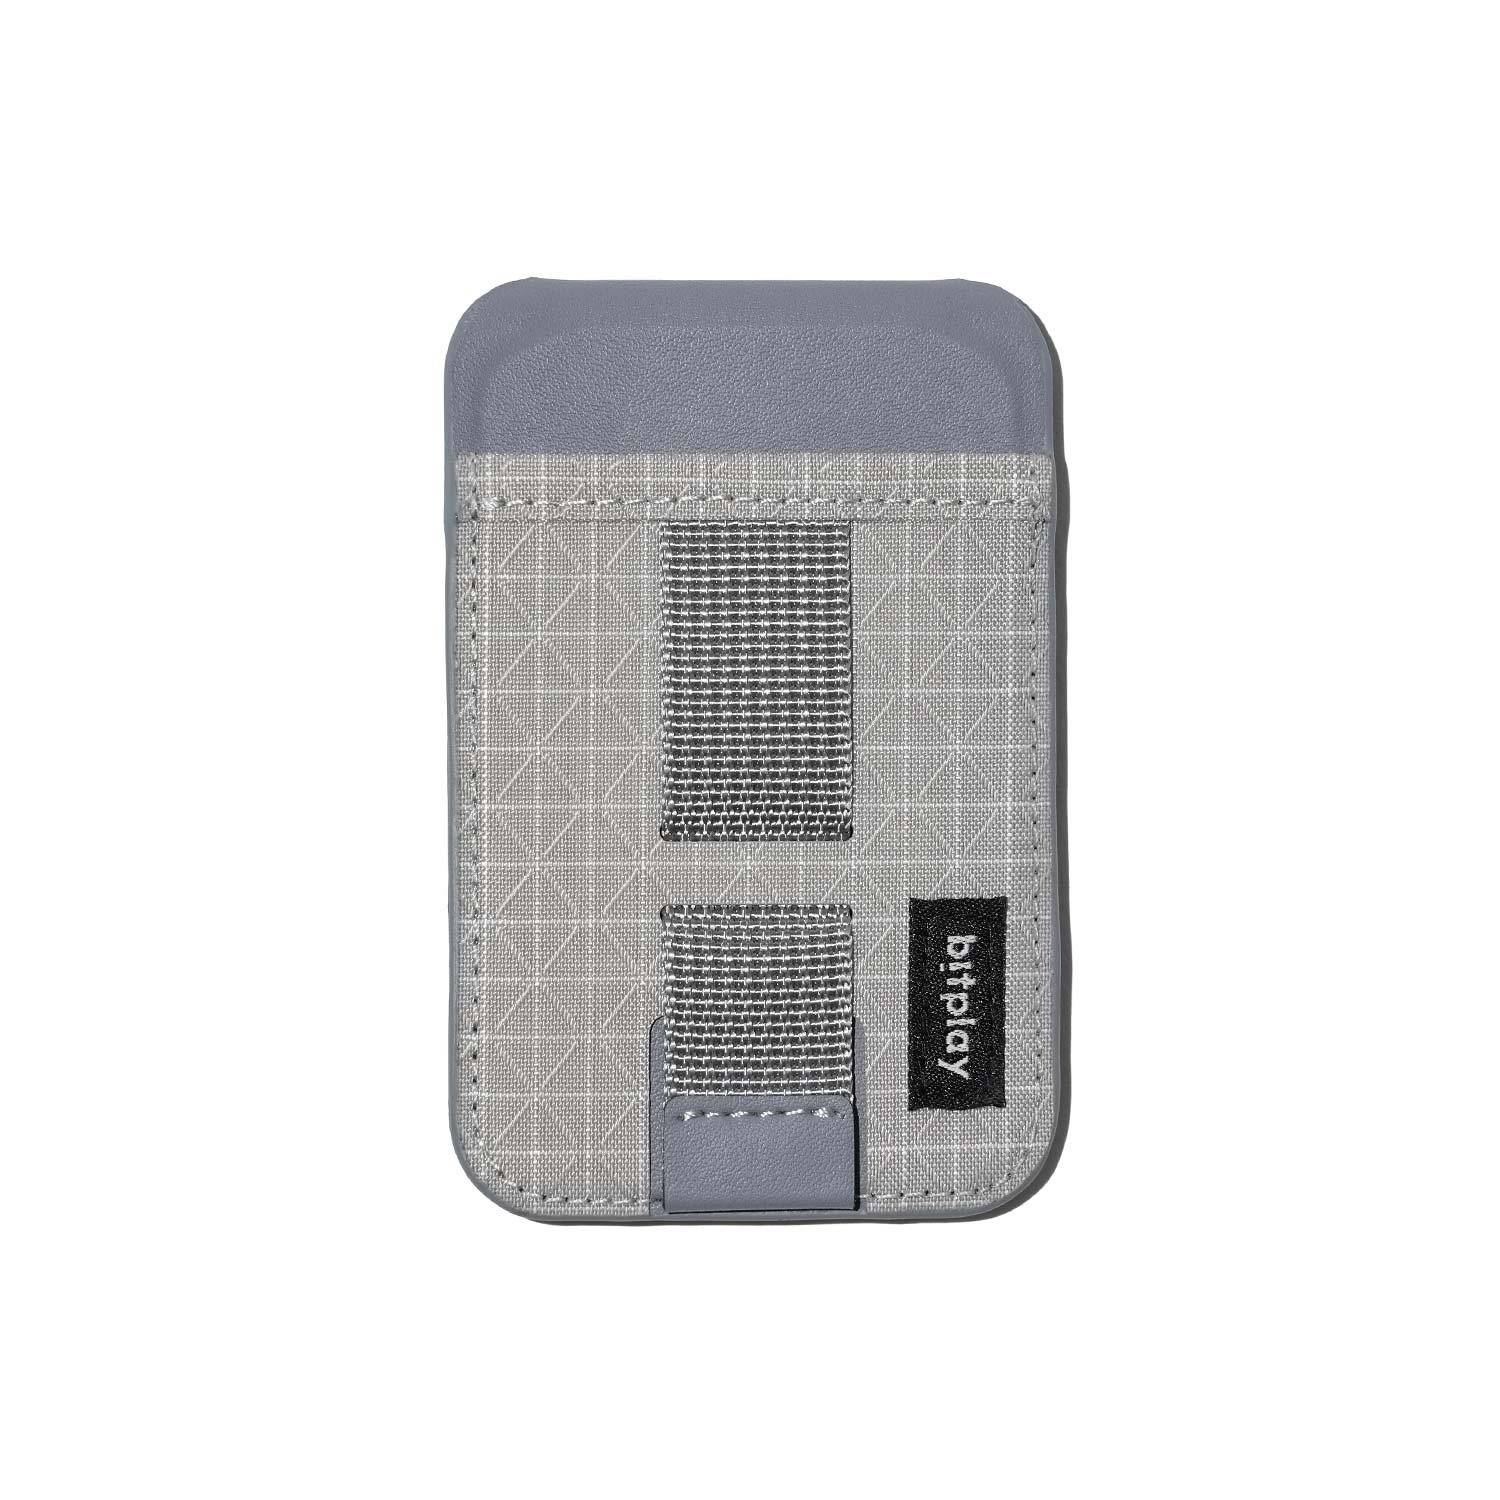 Bitplay Magnetic Wallet Stand V2 Multi-angle Card Holder with Hand-held Woven Strap, Up to 3 Cards